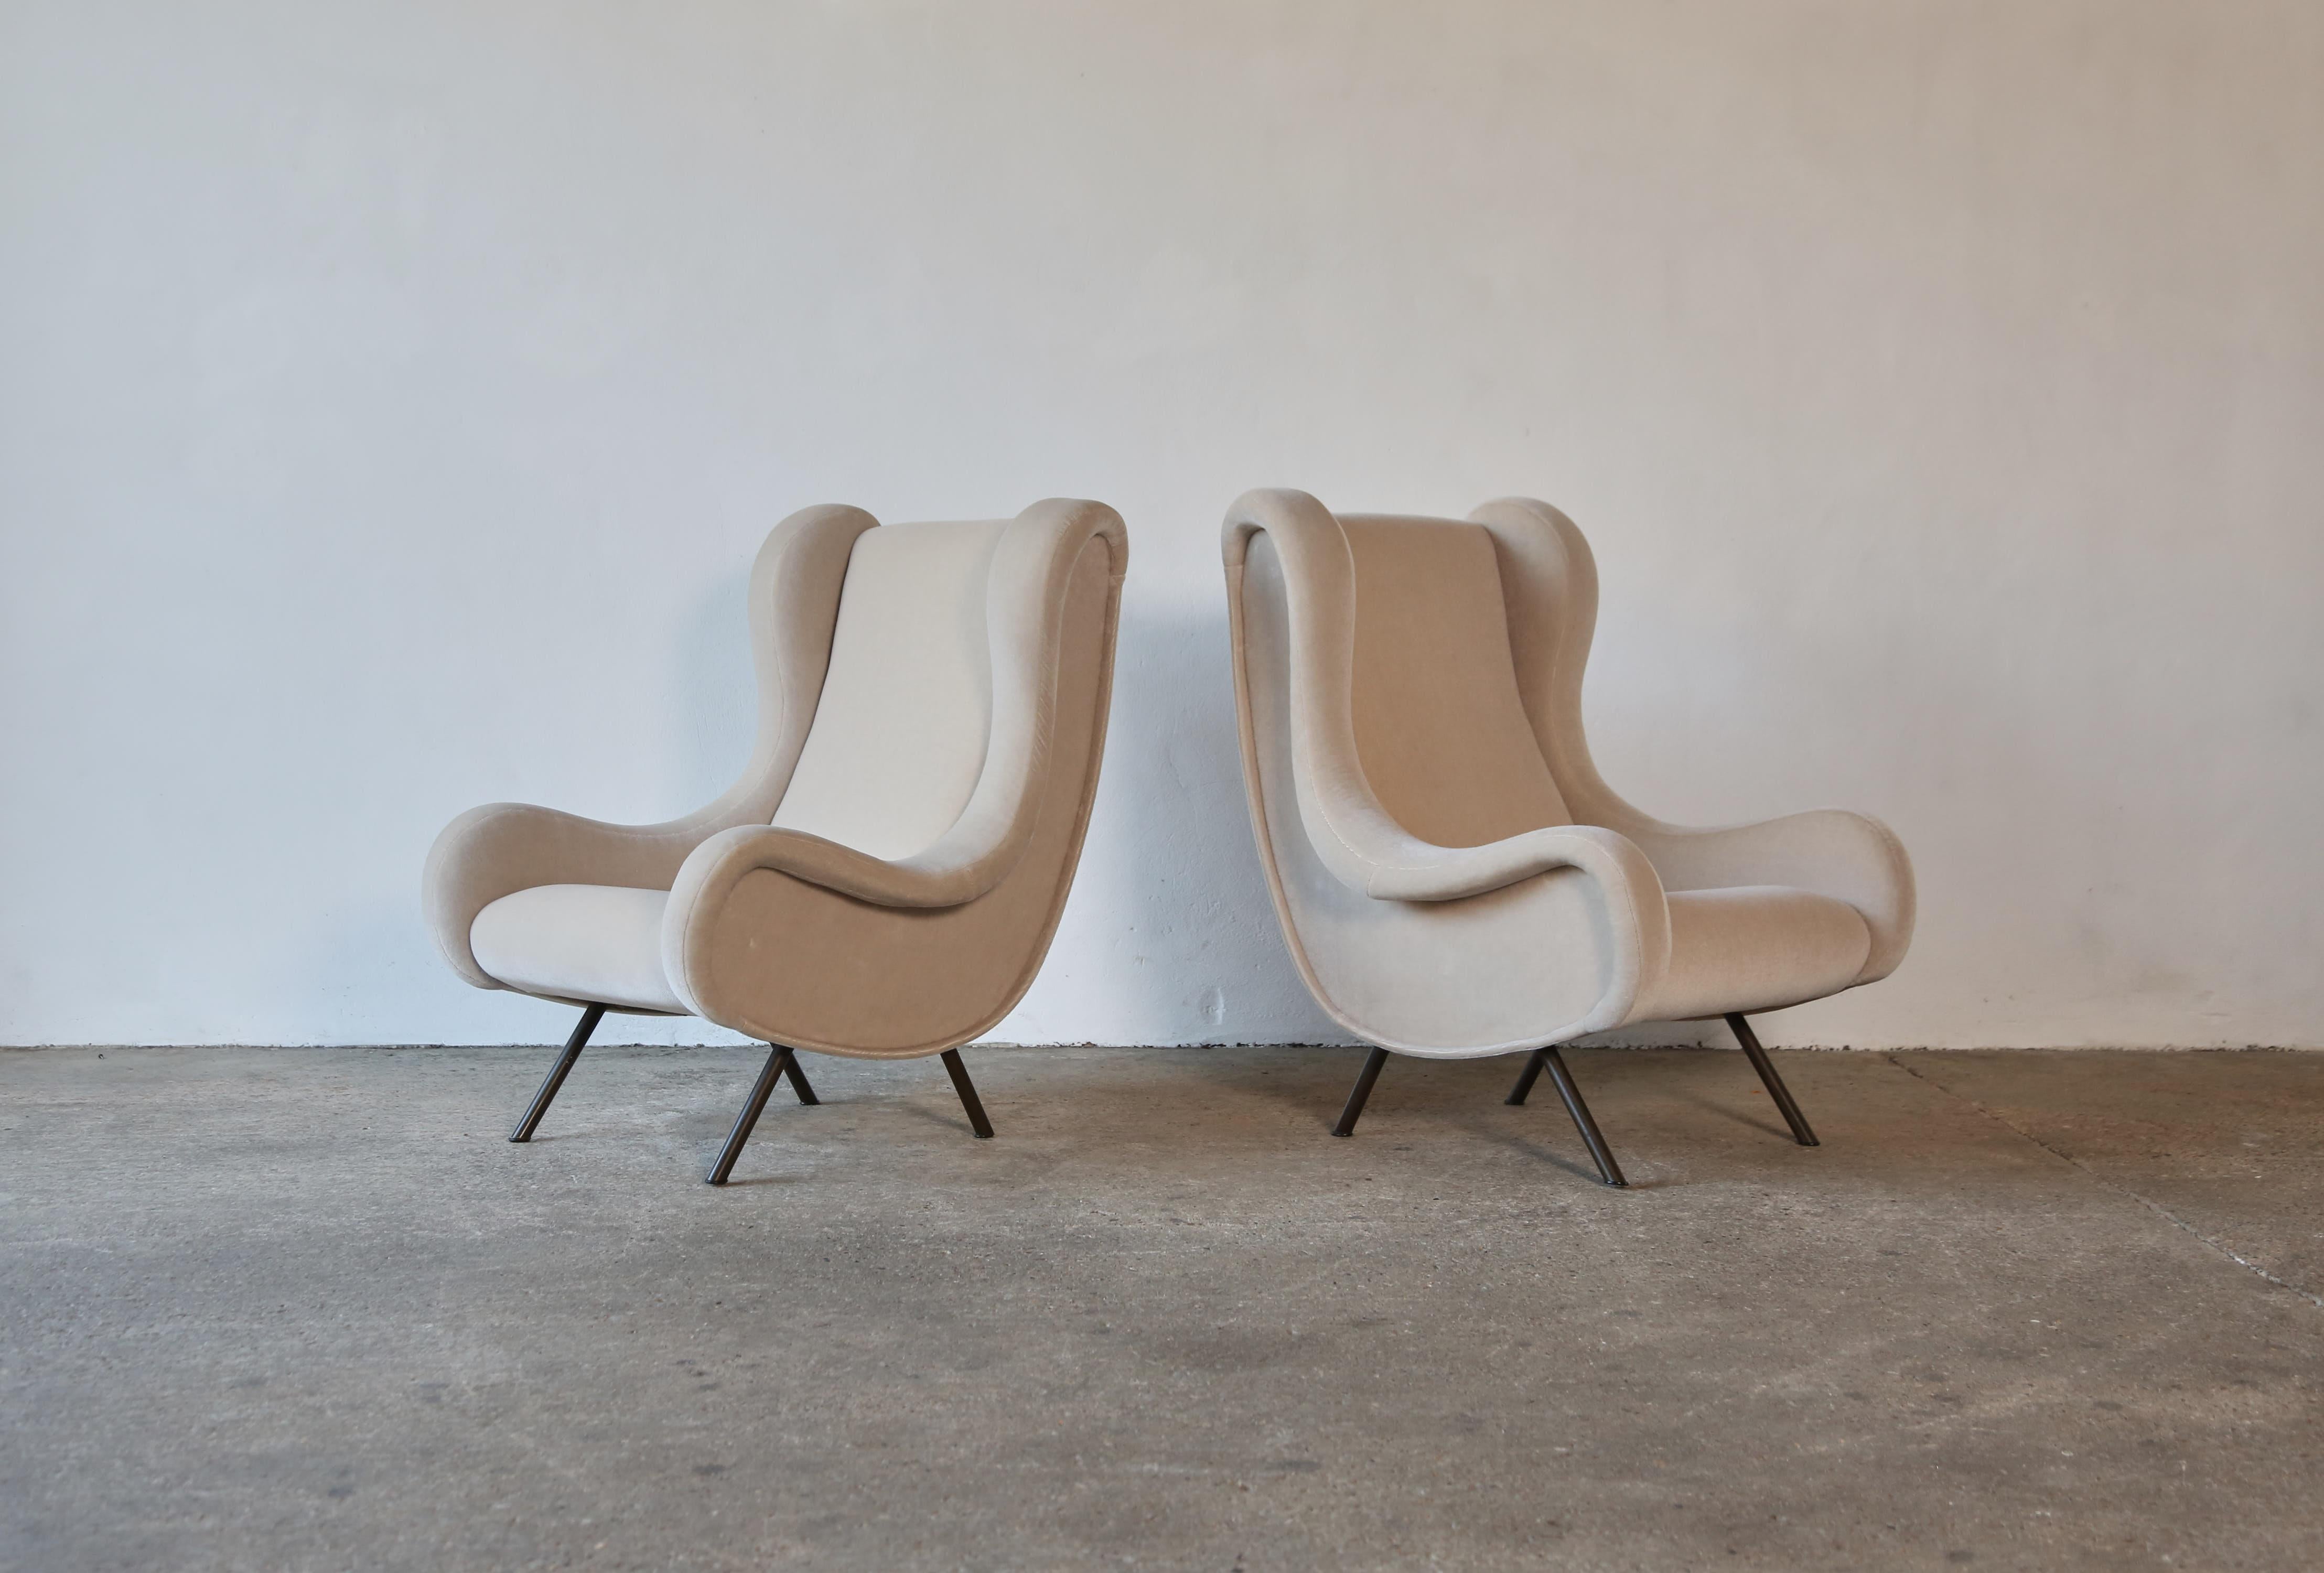 An pair of authentic marco zanuso senior chairs, Arflex, Italy, 1960s. These chairs have been reupholstered in a premium, ivory, 100% mohair velvet. Fast shipping worldwide.



